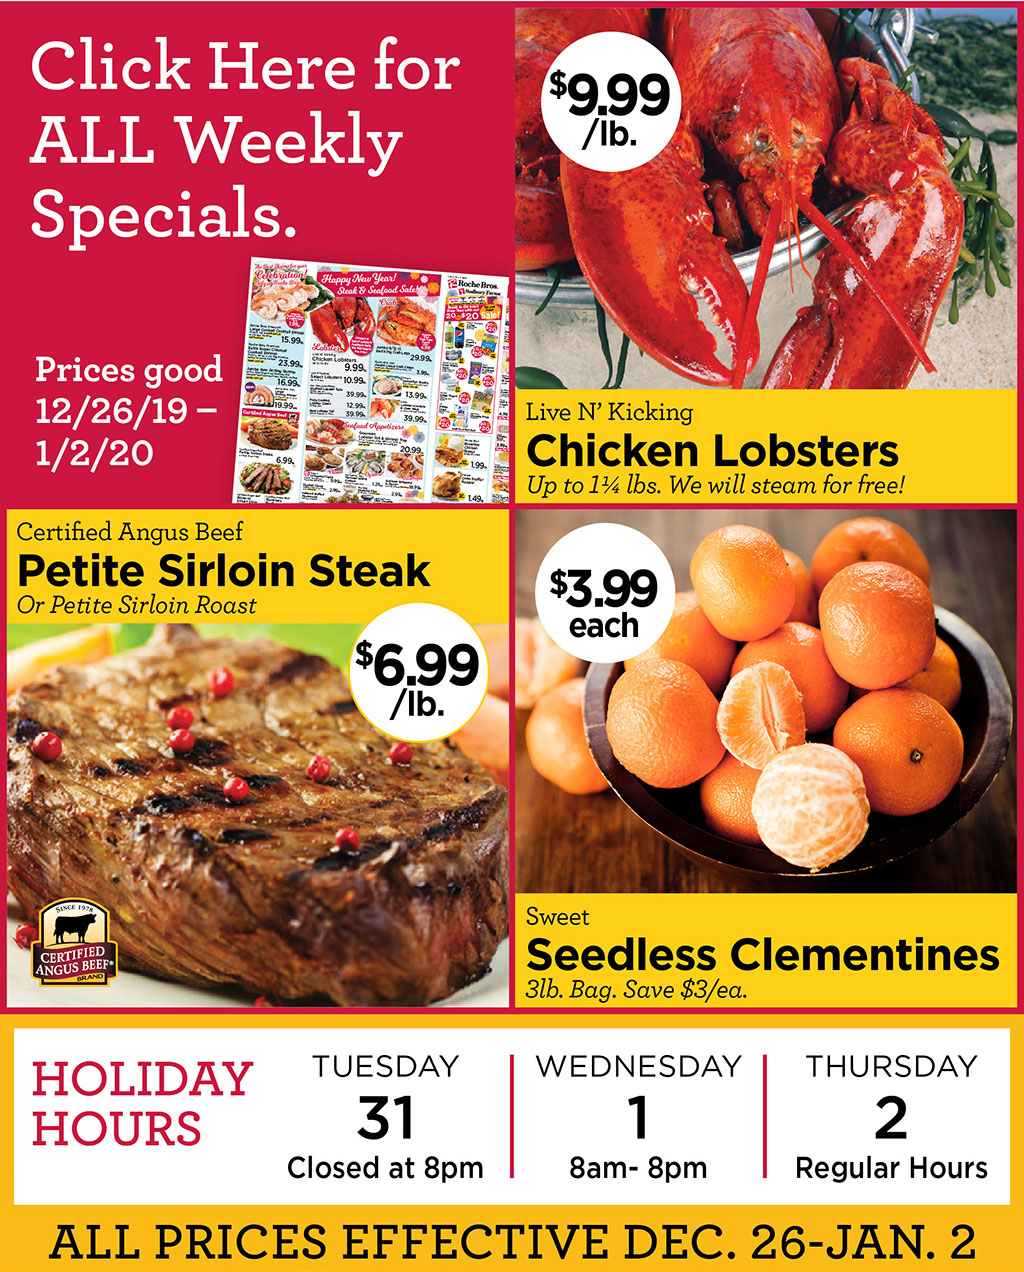 Live N Kicking Chicken Lobsters $9.99/lb. Up to 11/4 lbs. We will steam for free!, Certified Angus Beef Petite Sirloin Steak $6.99/lb. Or Petite Sirloin Roast, Sweet Seedless Clementines $3.99each 3lb. Bag. Save $3/ea.  Click Here for ALL Weekly Specials. Prices good 12/26/19  1/2/20  - HOLIDAY HOURS Tues 12/31 Closed at 8PM, Weds 1/1/20 open 8AM-8PM, Thurs 1/2/20 Regular Hours